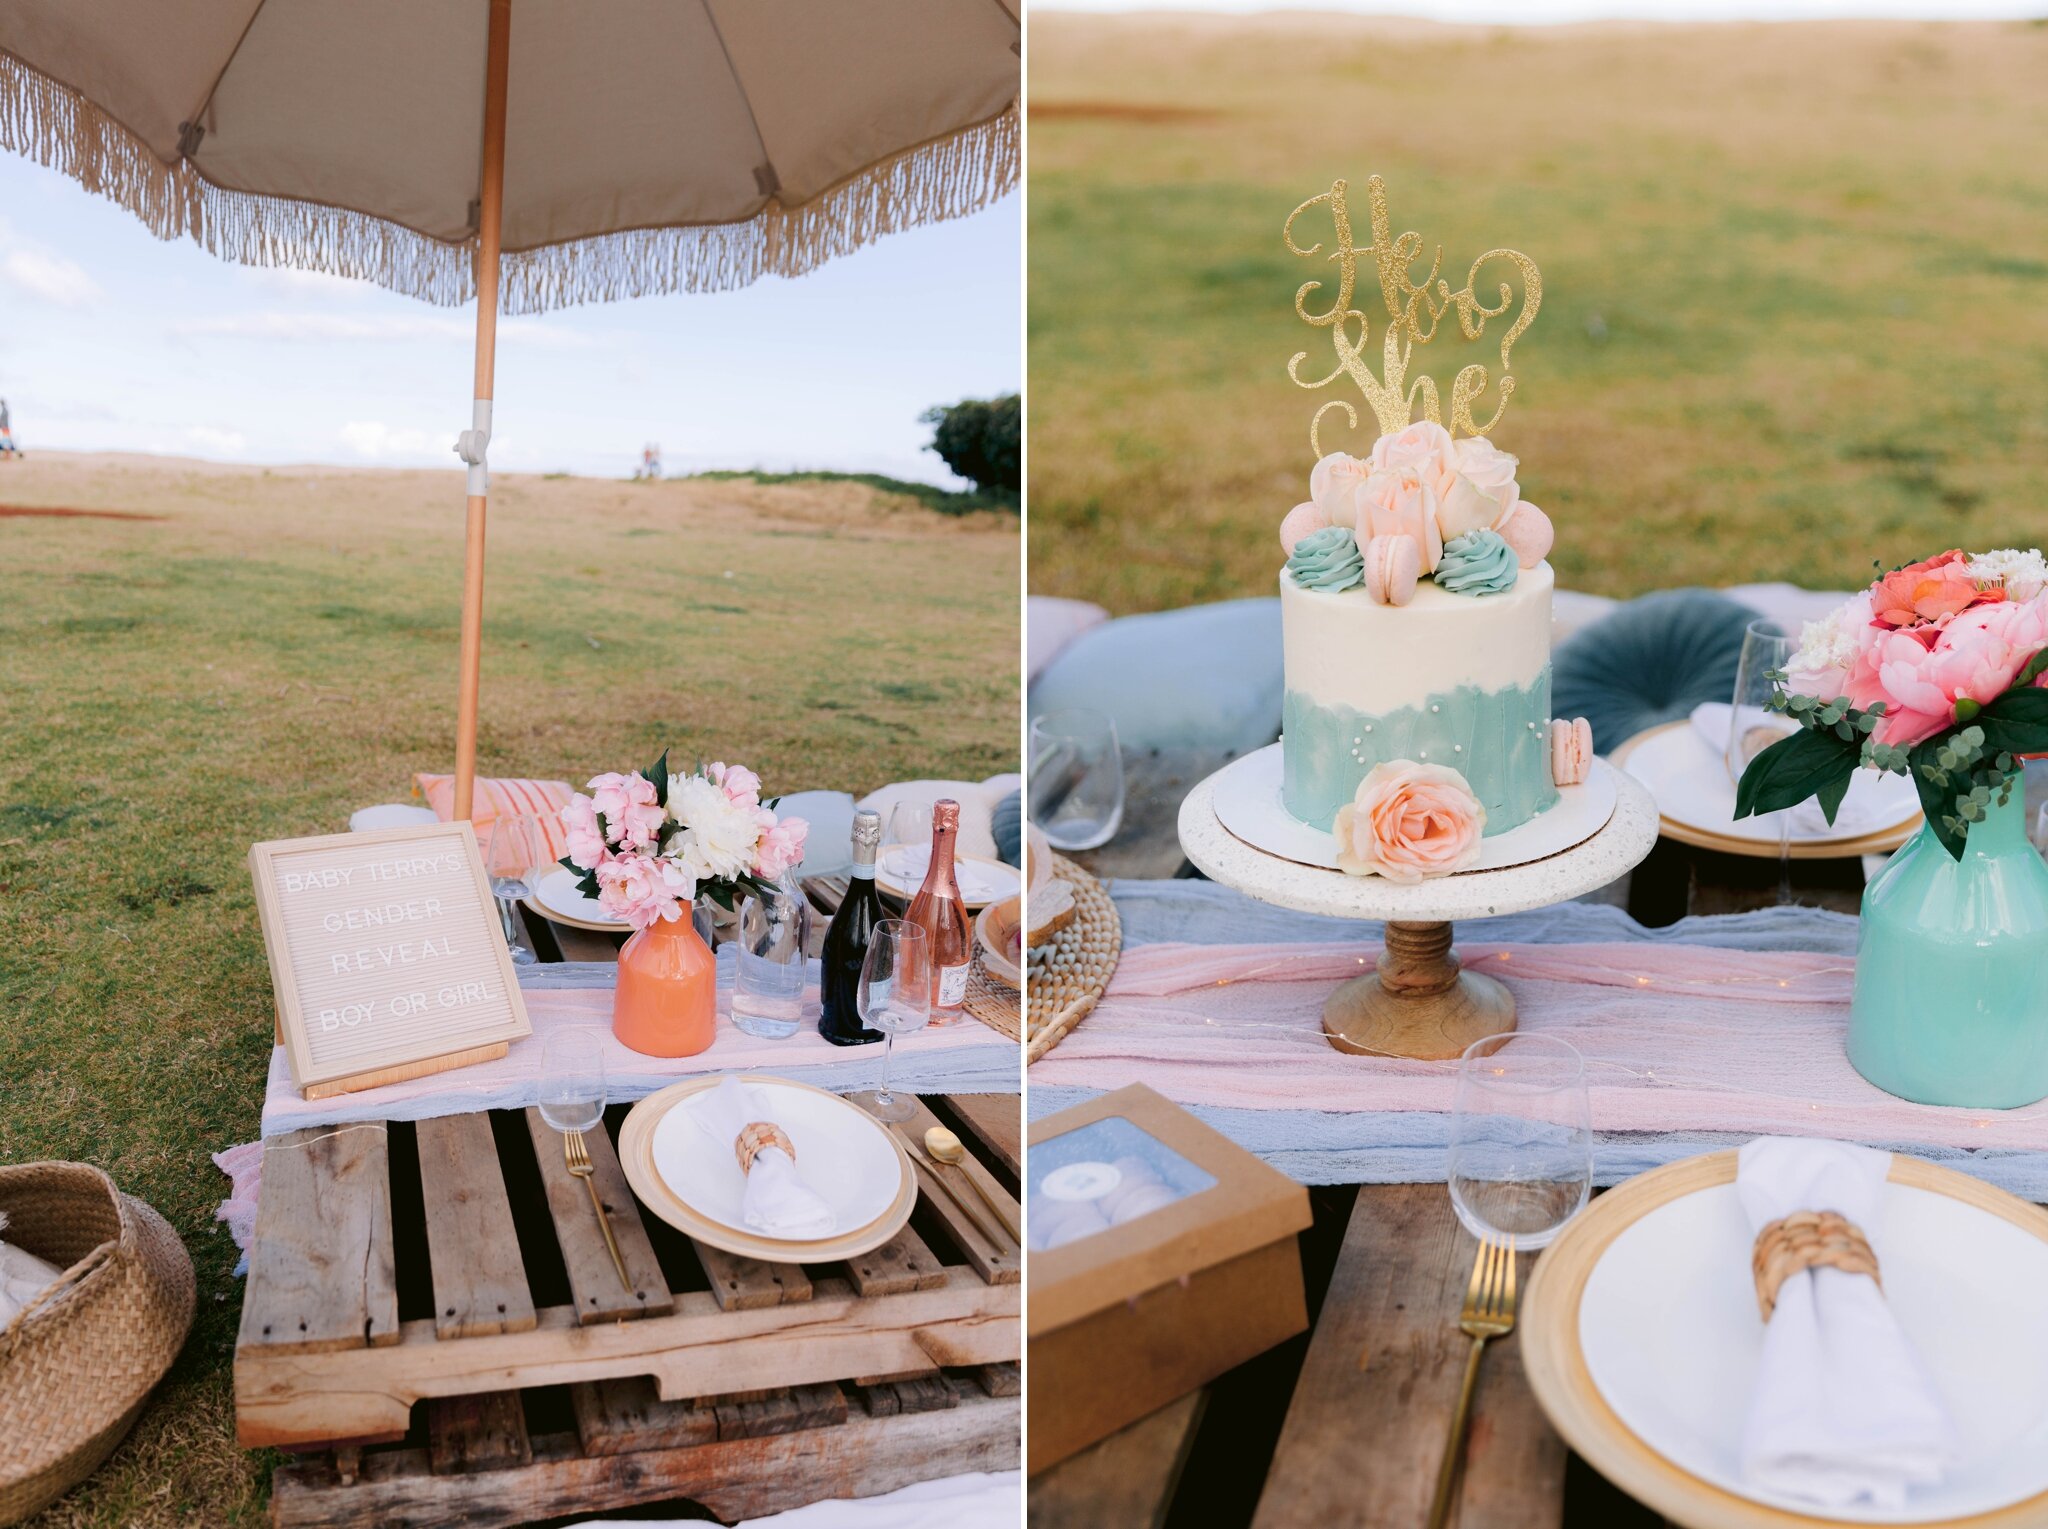 Gender Reveal Party with Luxury Picnic at Waialae Beach Park - Oahu Maternity Photographer